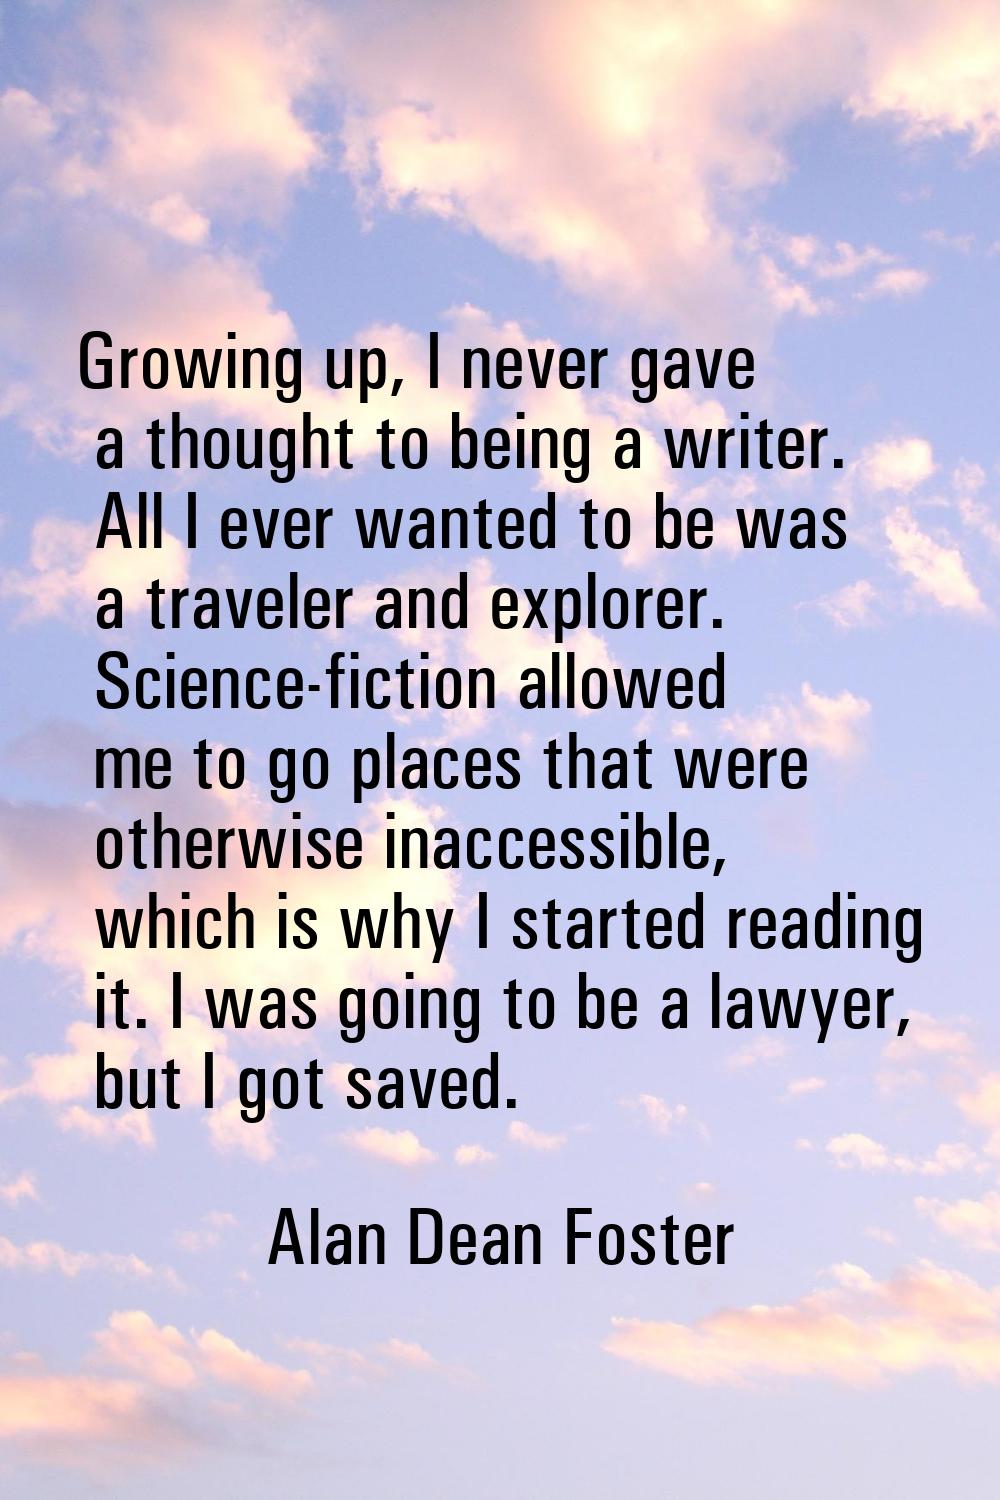 Growing up, I never gave a thought to being a writer. All I ever wanted to be was a traveler and ex